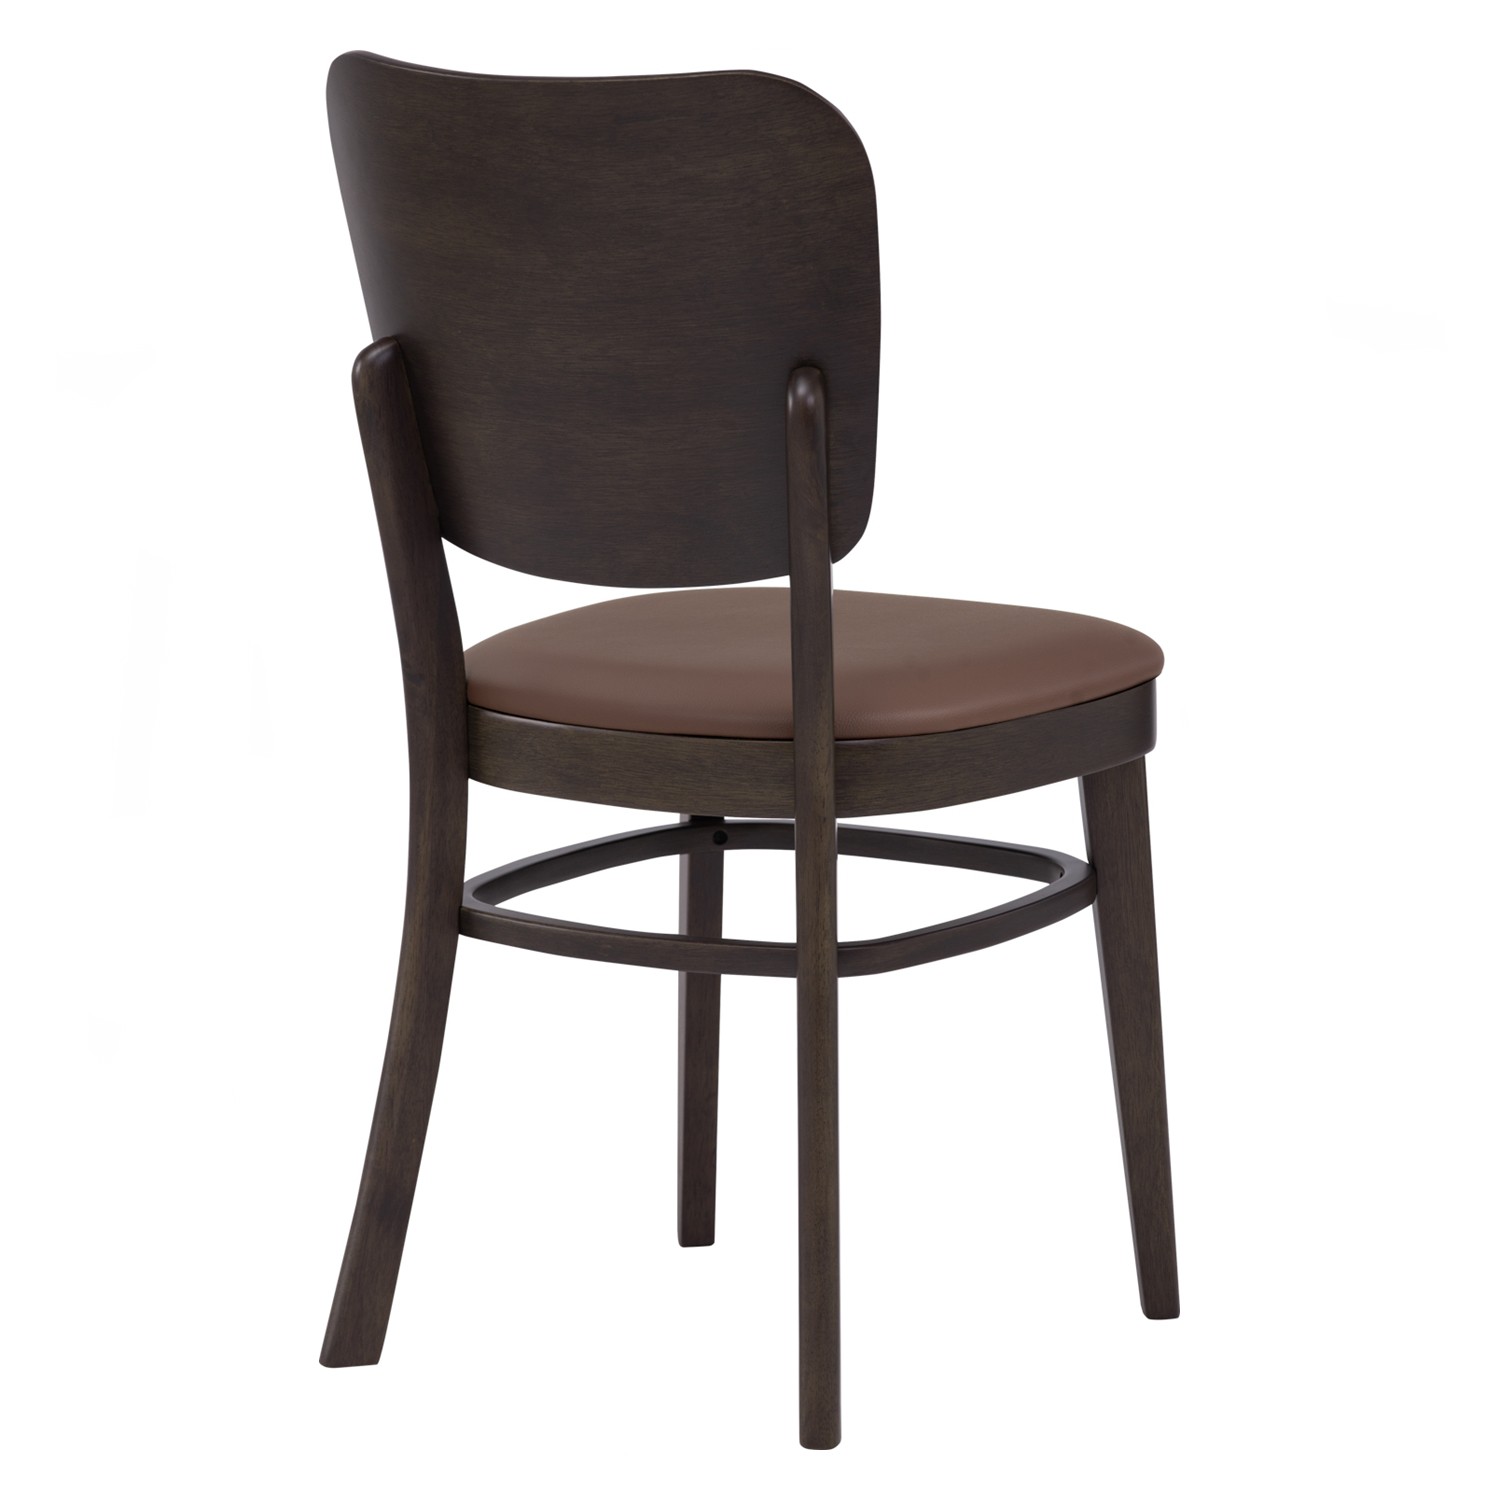 BEVERLY DINING CHAIR 117/523